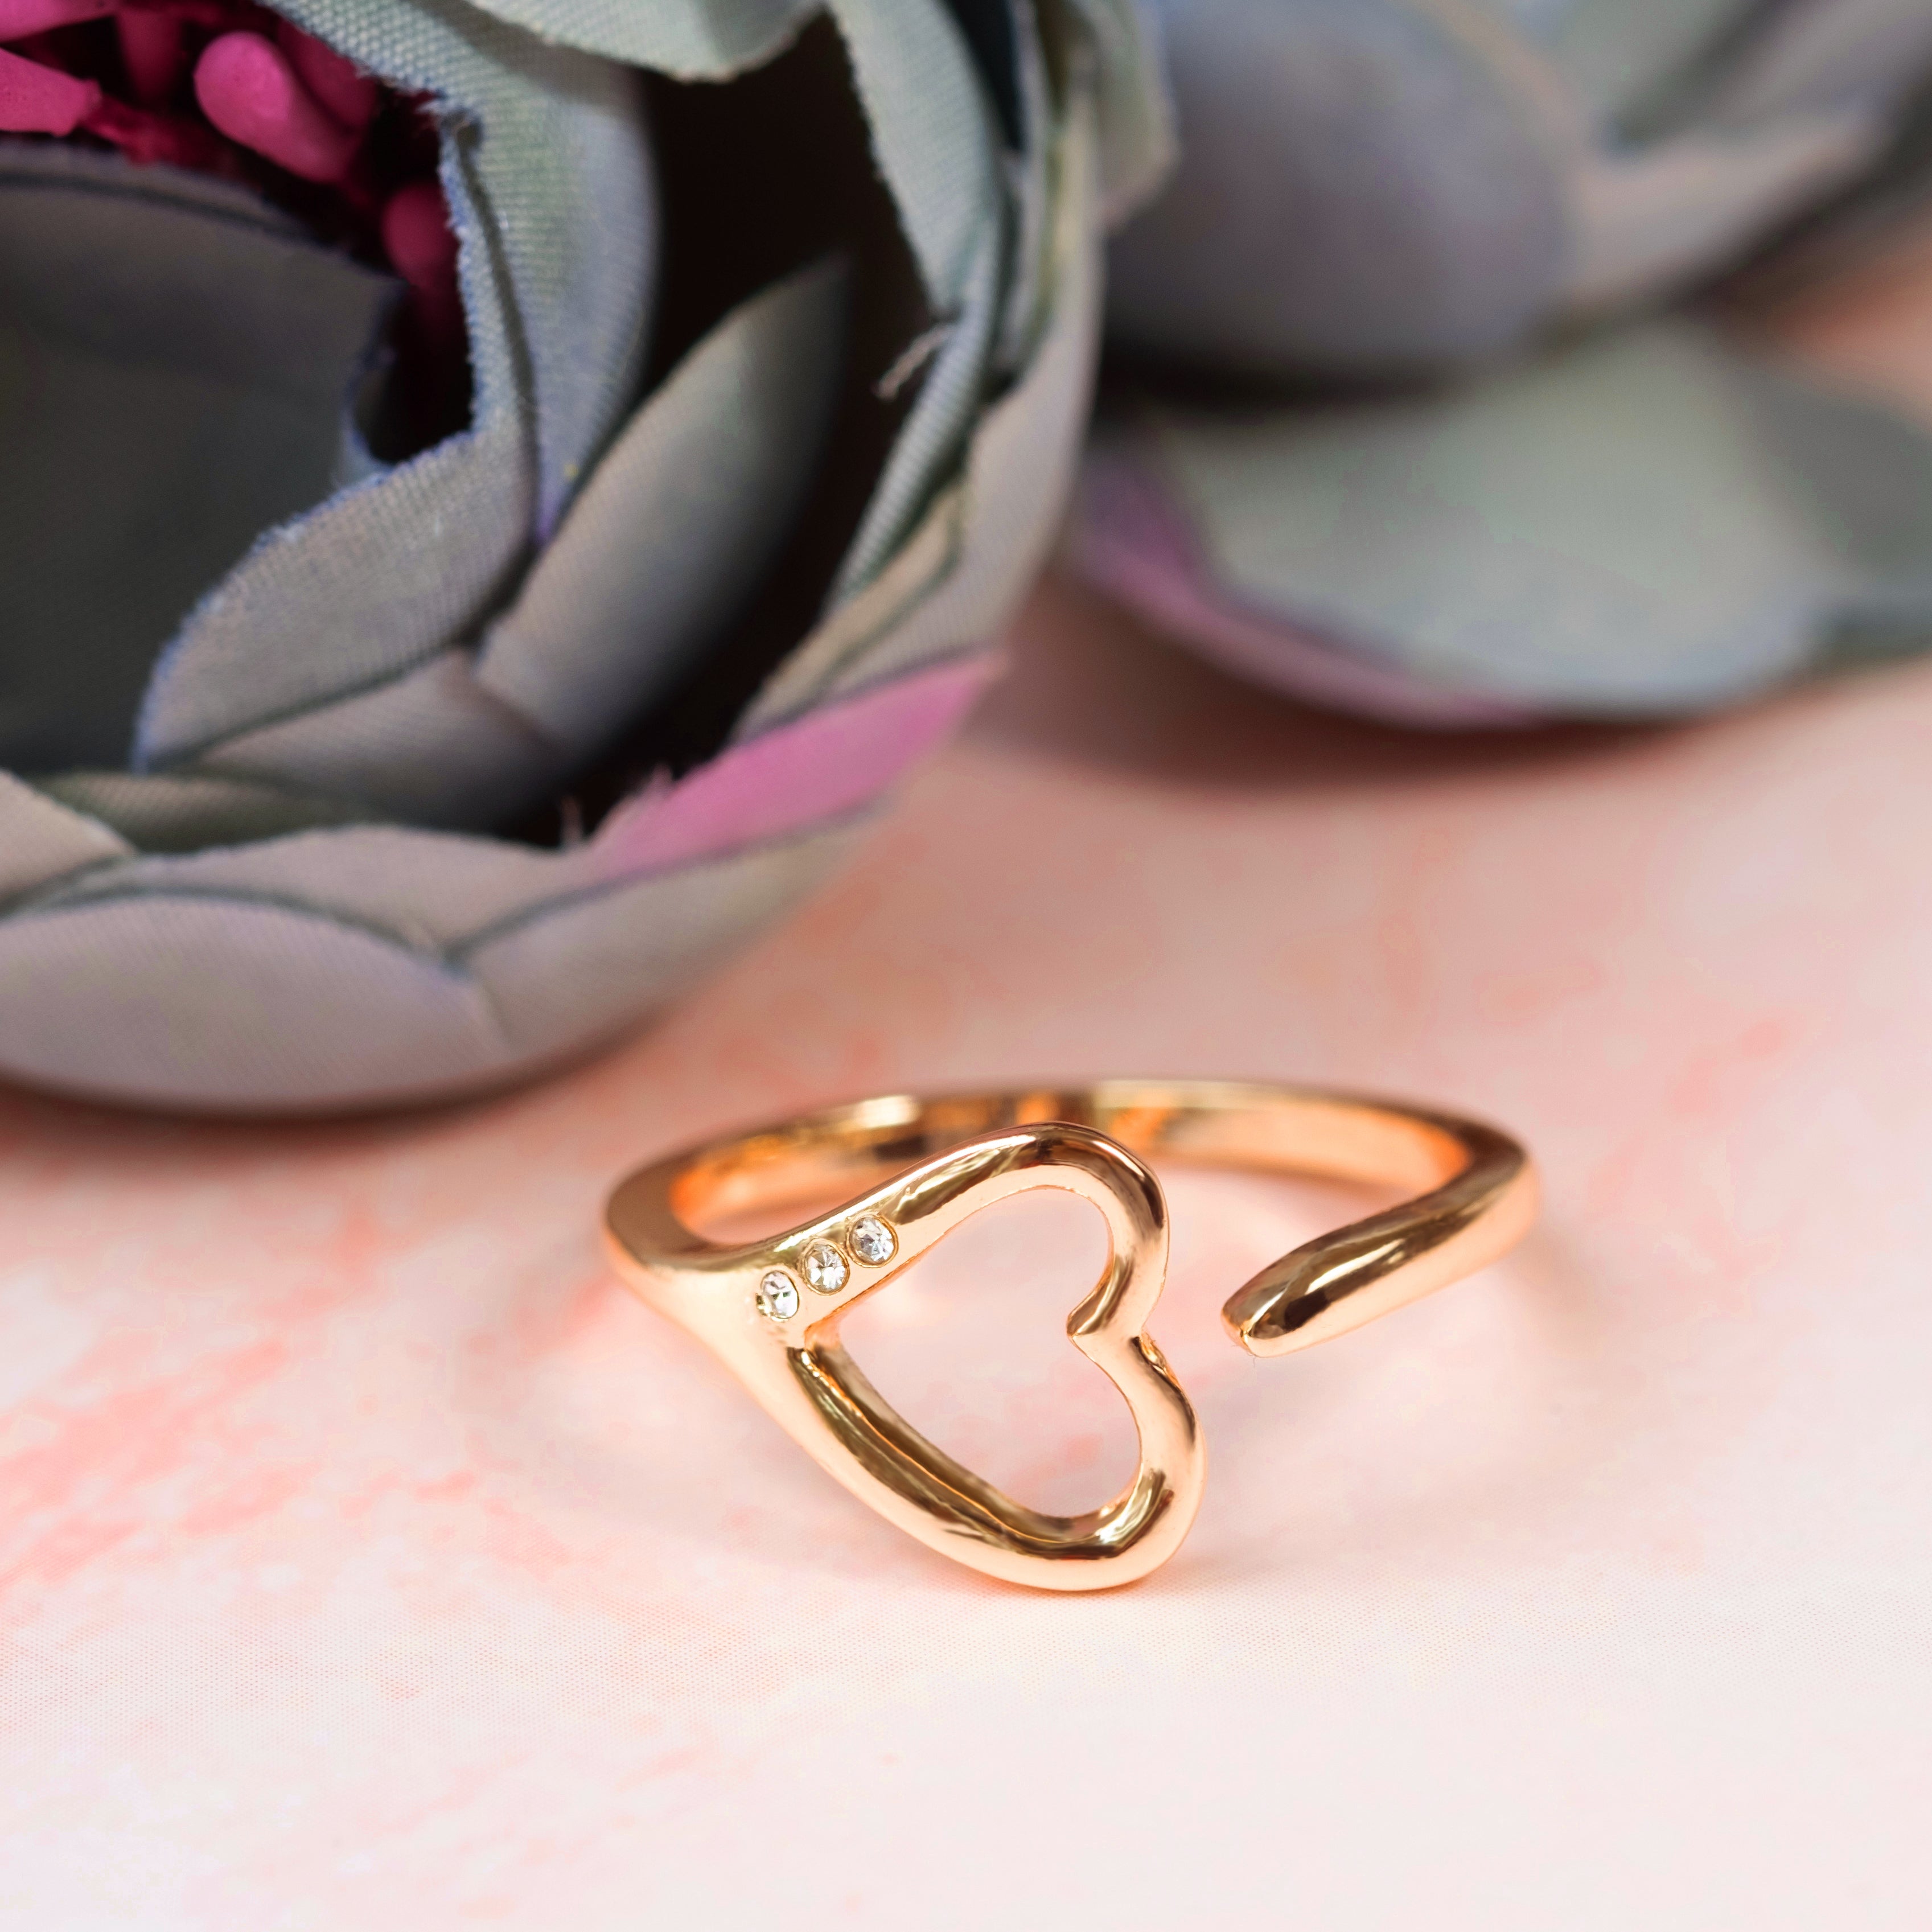 Heart Ring in Rose Gold plating size 6